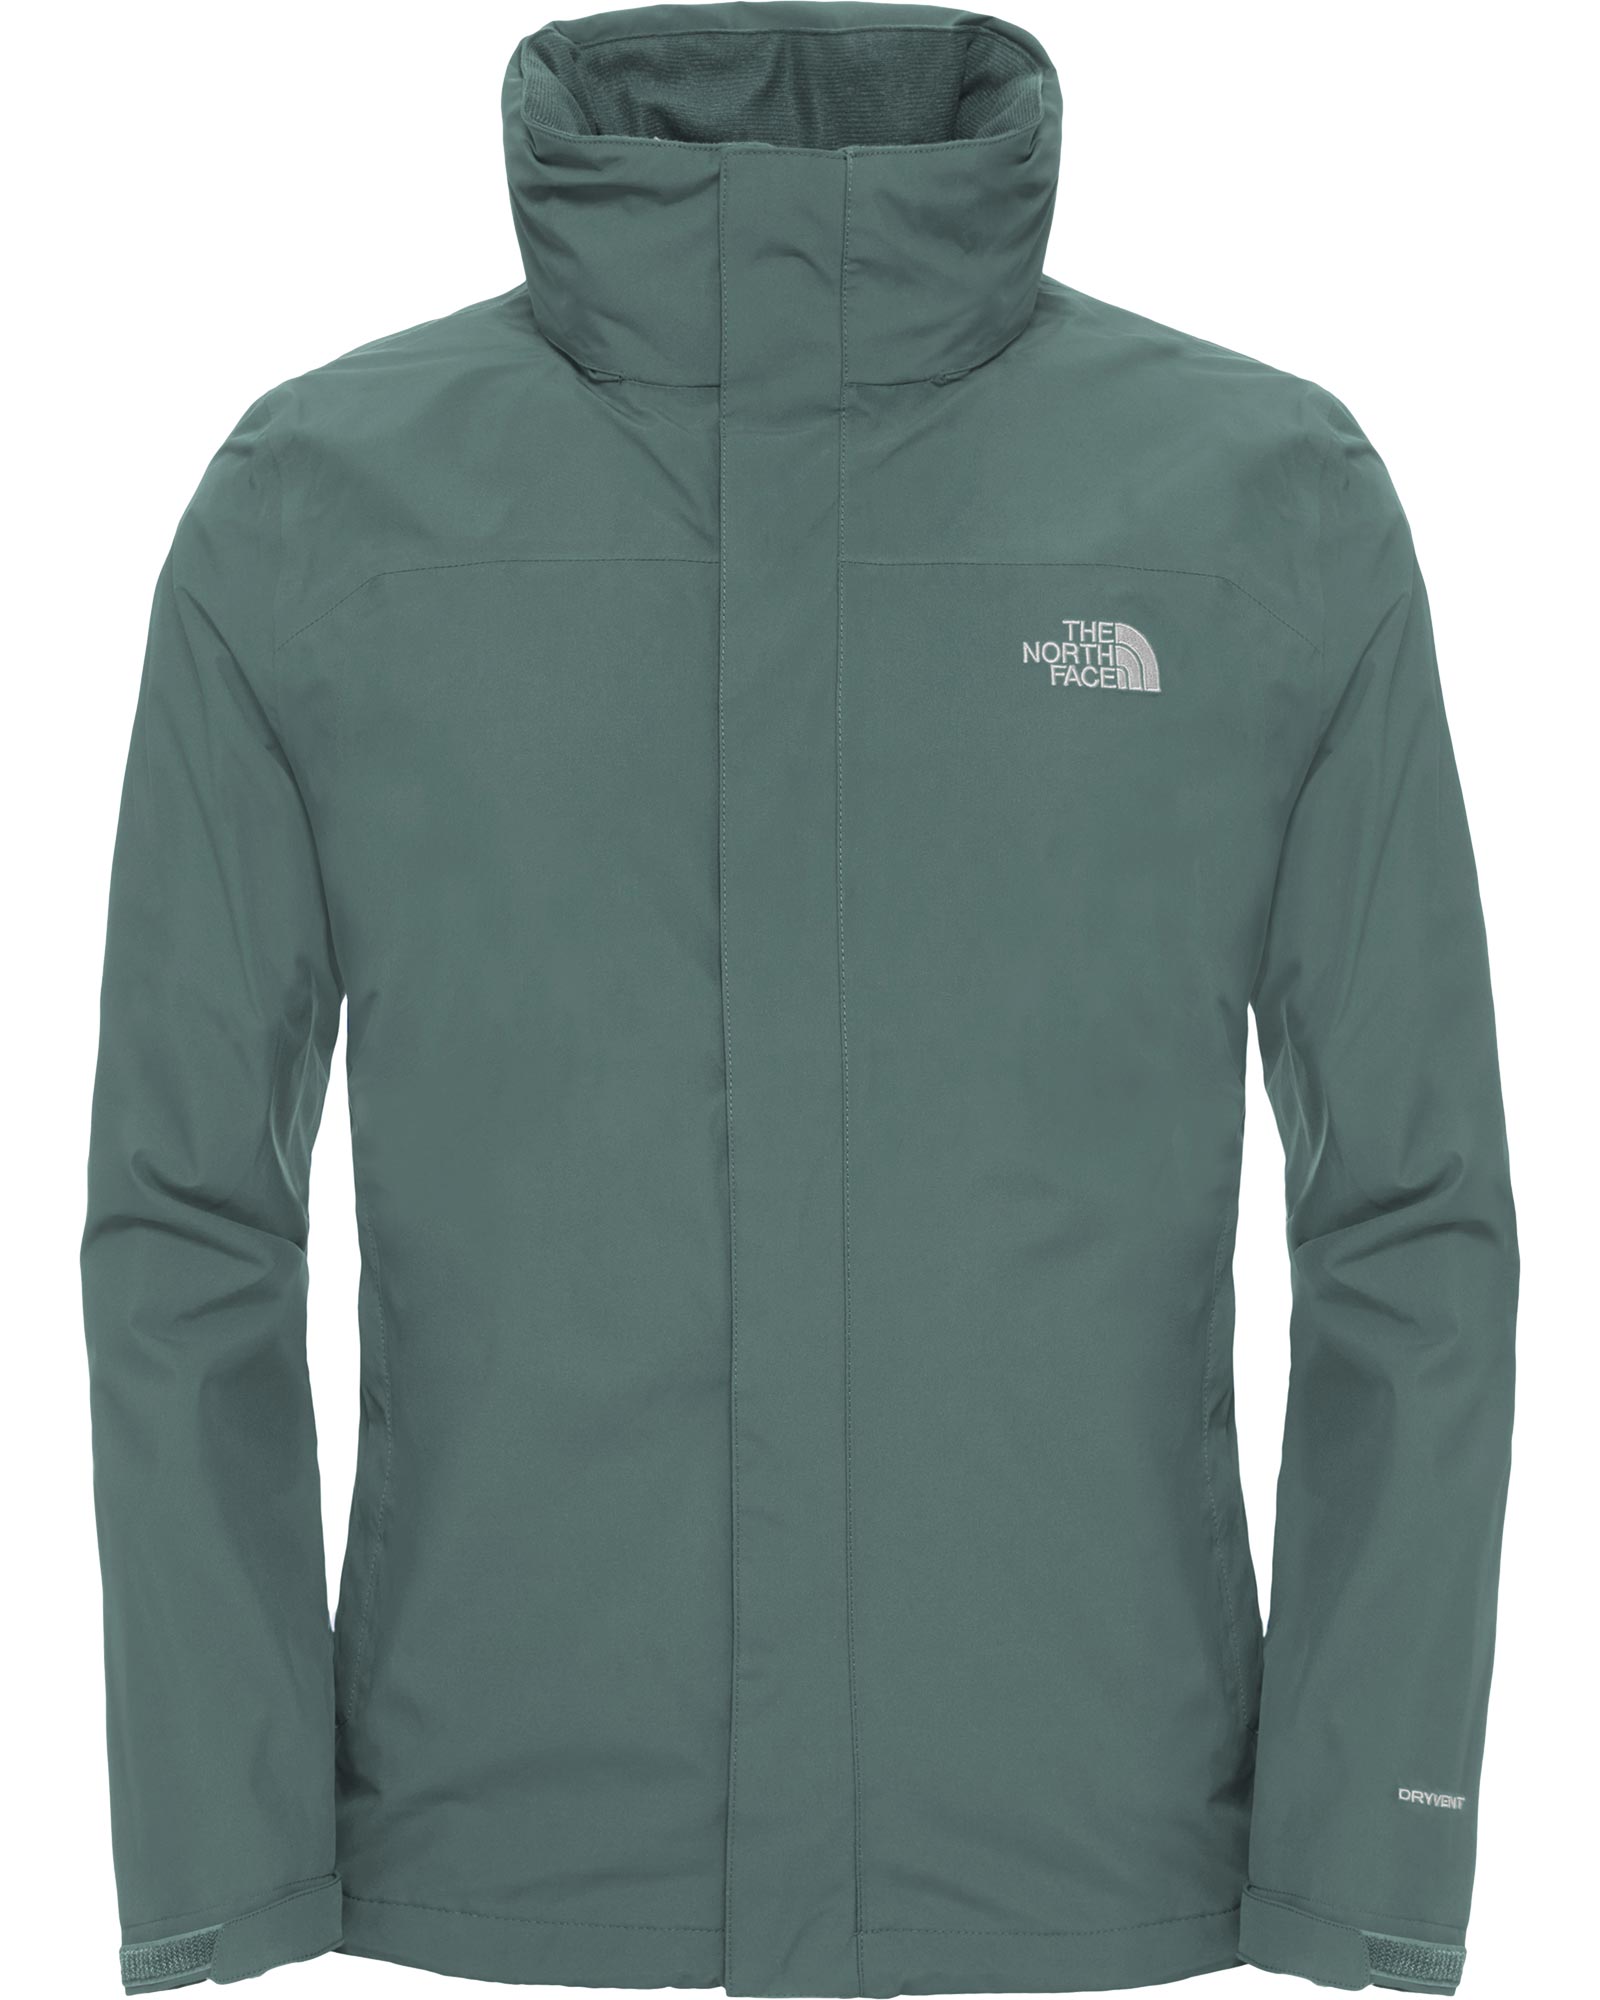 The North Face Sangro DryVent Men’s Jacket - Spruce Green M